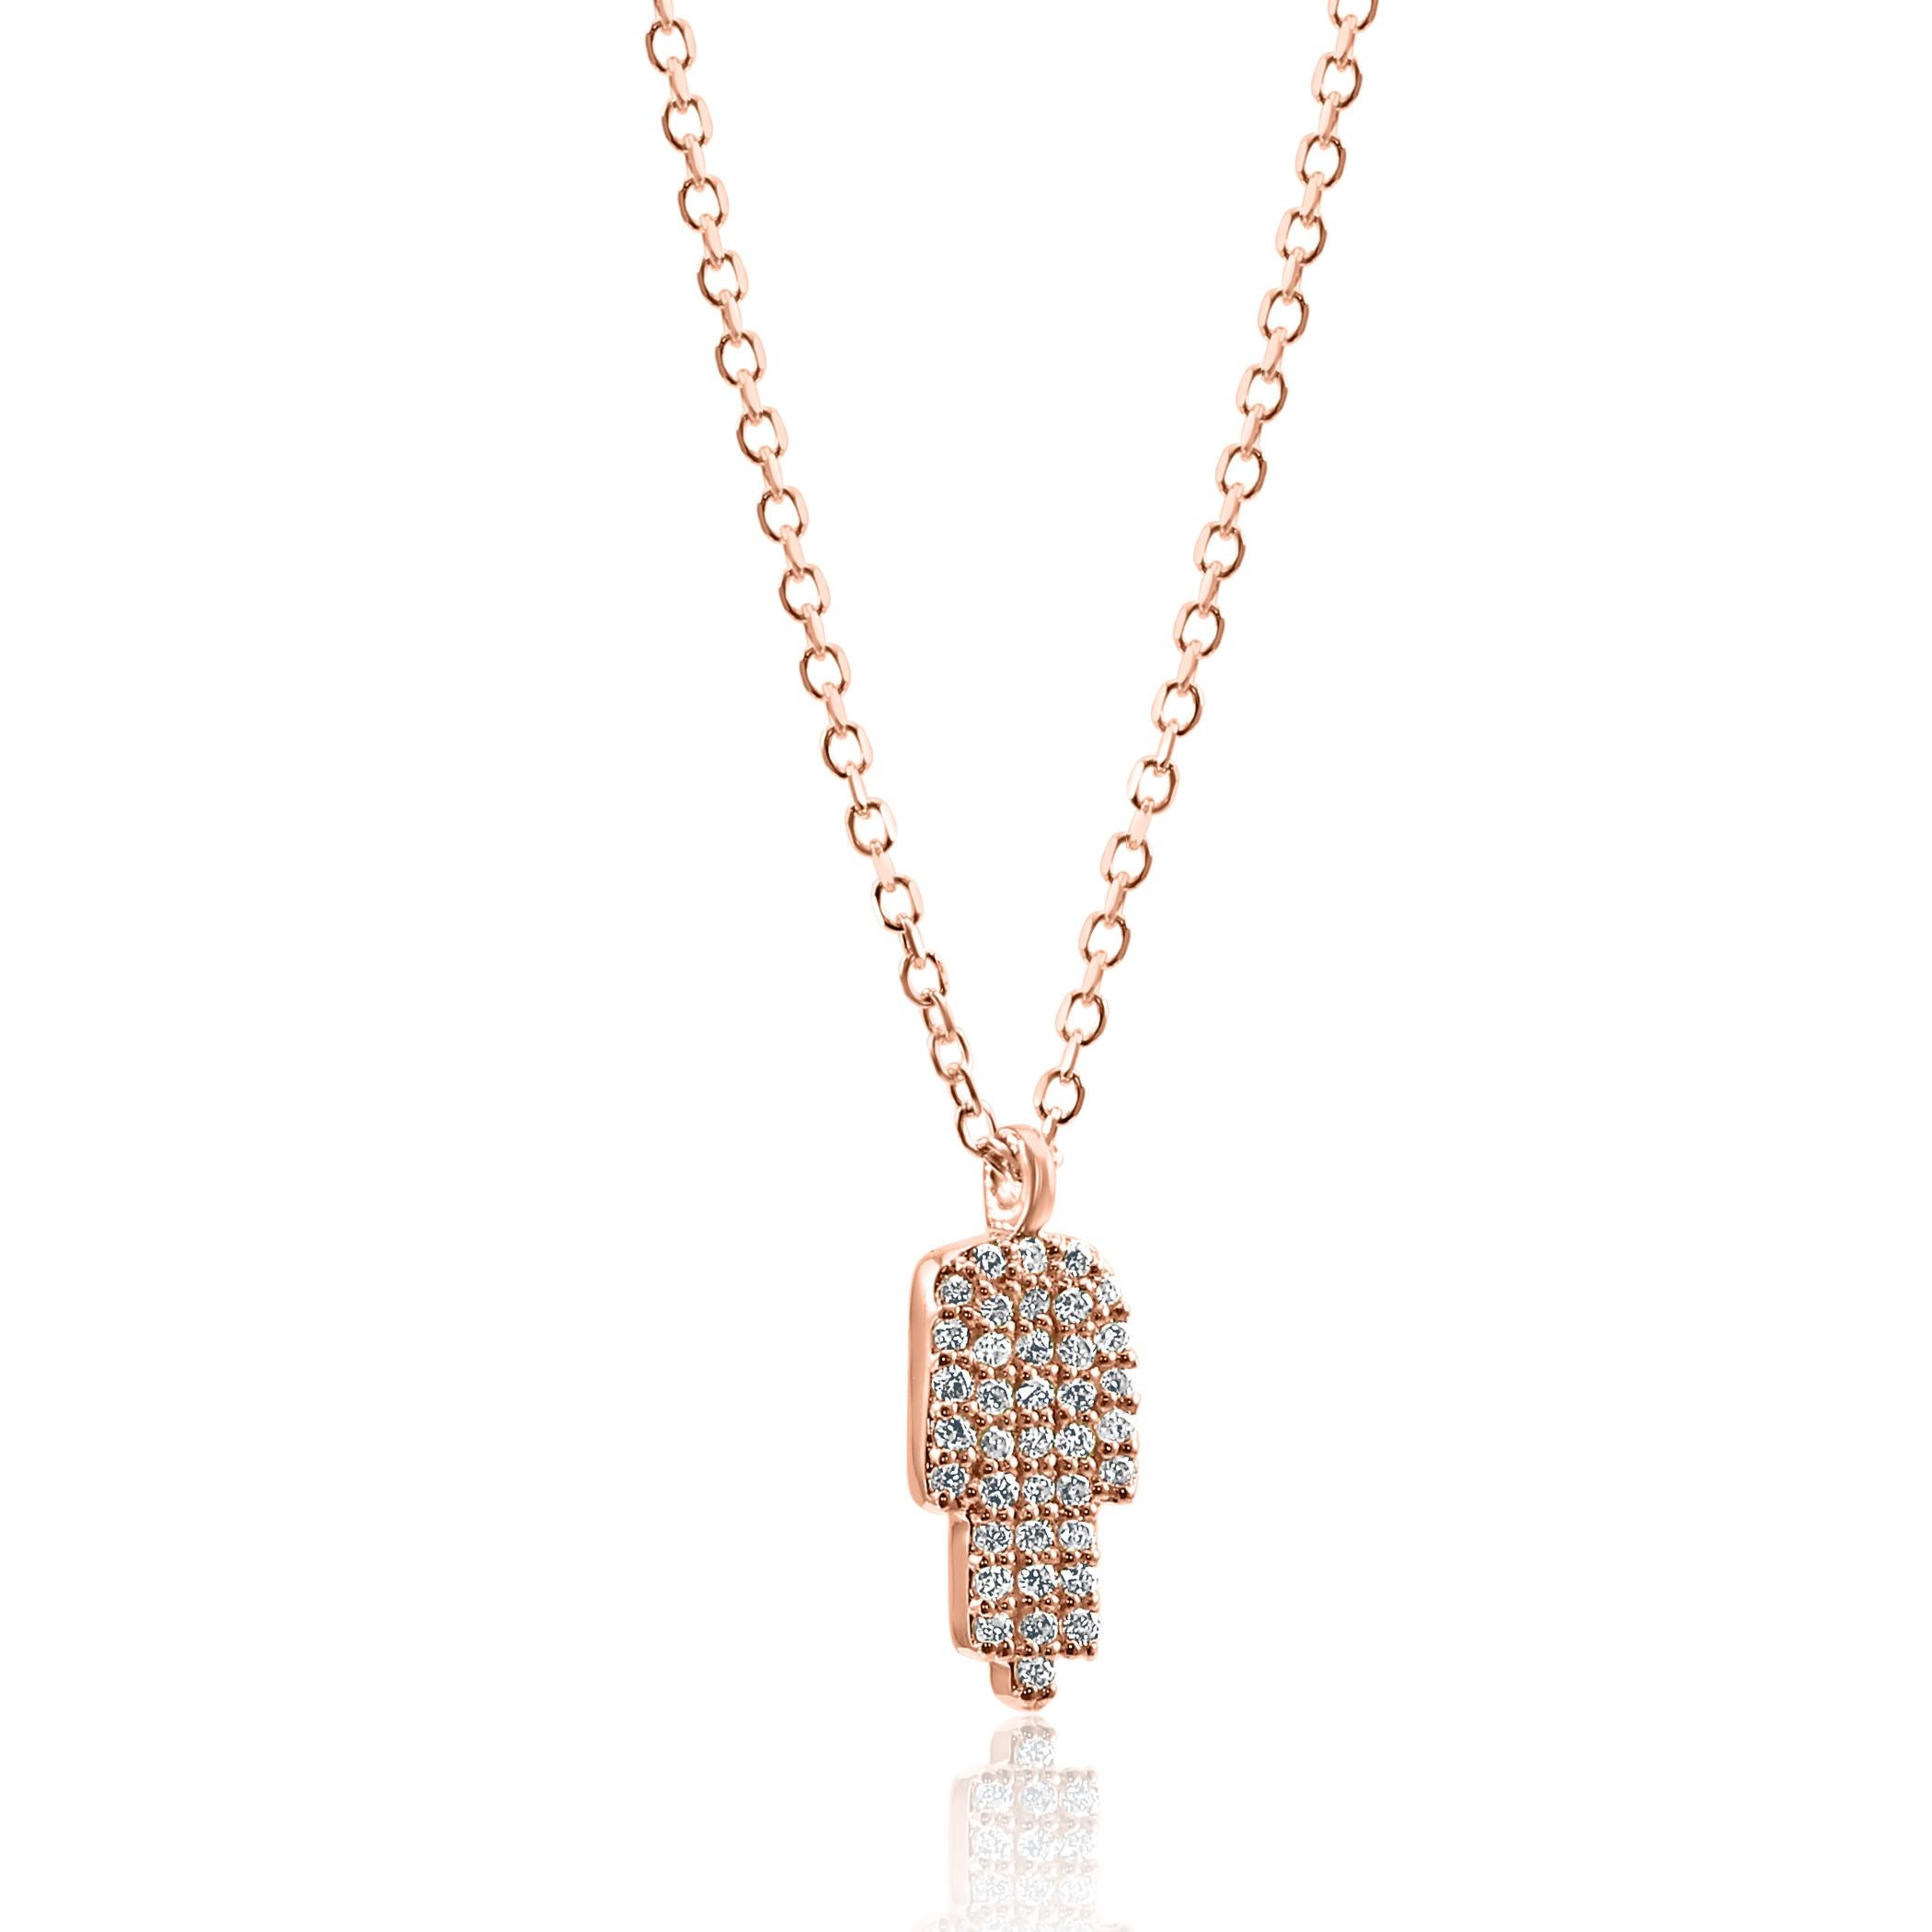 Embrace both style and symbolism with our Rose Gold Hamsa Pendant Chain Necklace.

The centerpiece of this necklace is the Hamsa pendant, a symbol recognized across various cultures for its protective and auspicious qualities. 

Adorning the surface